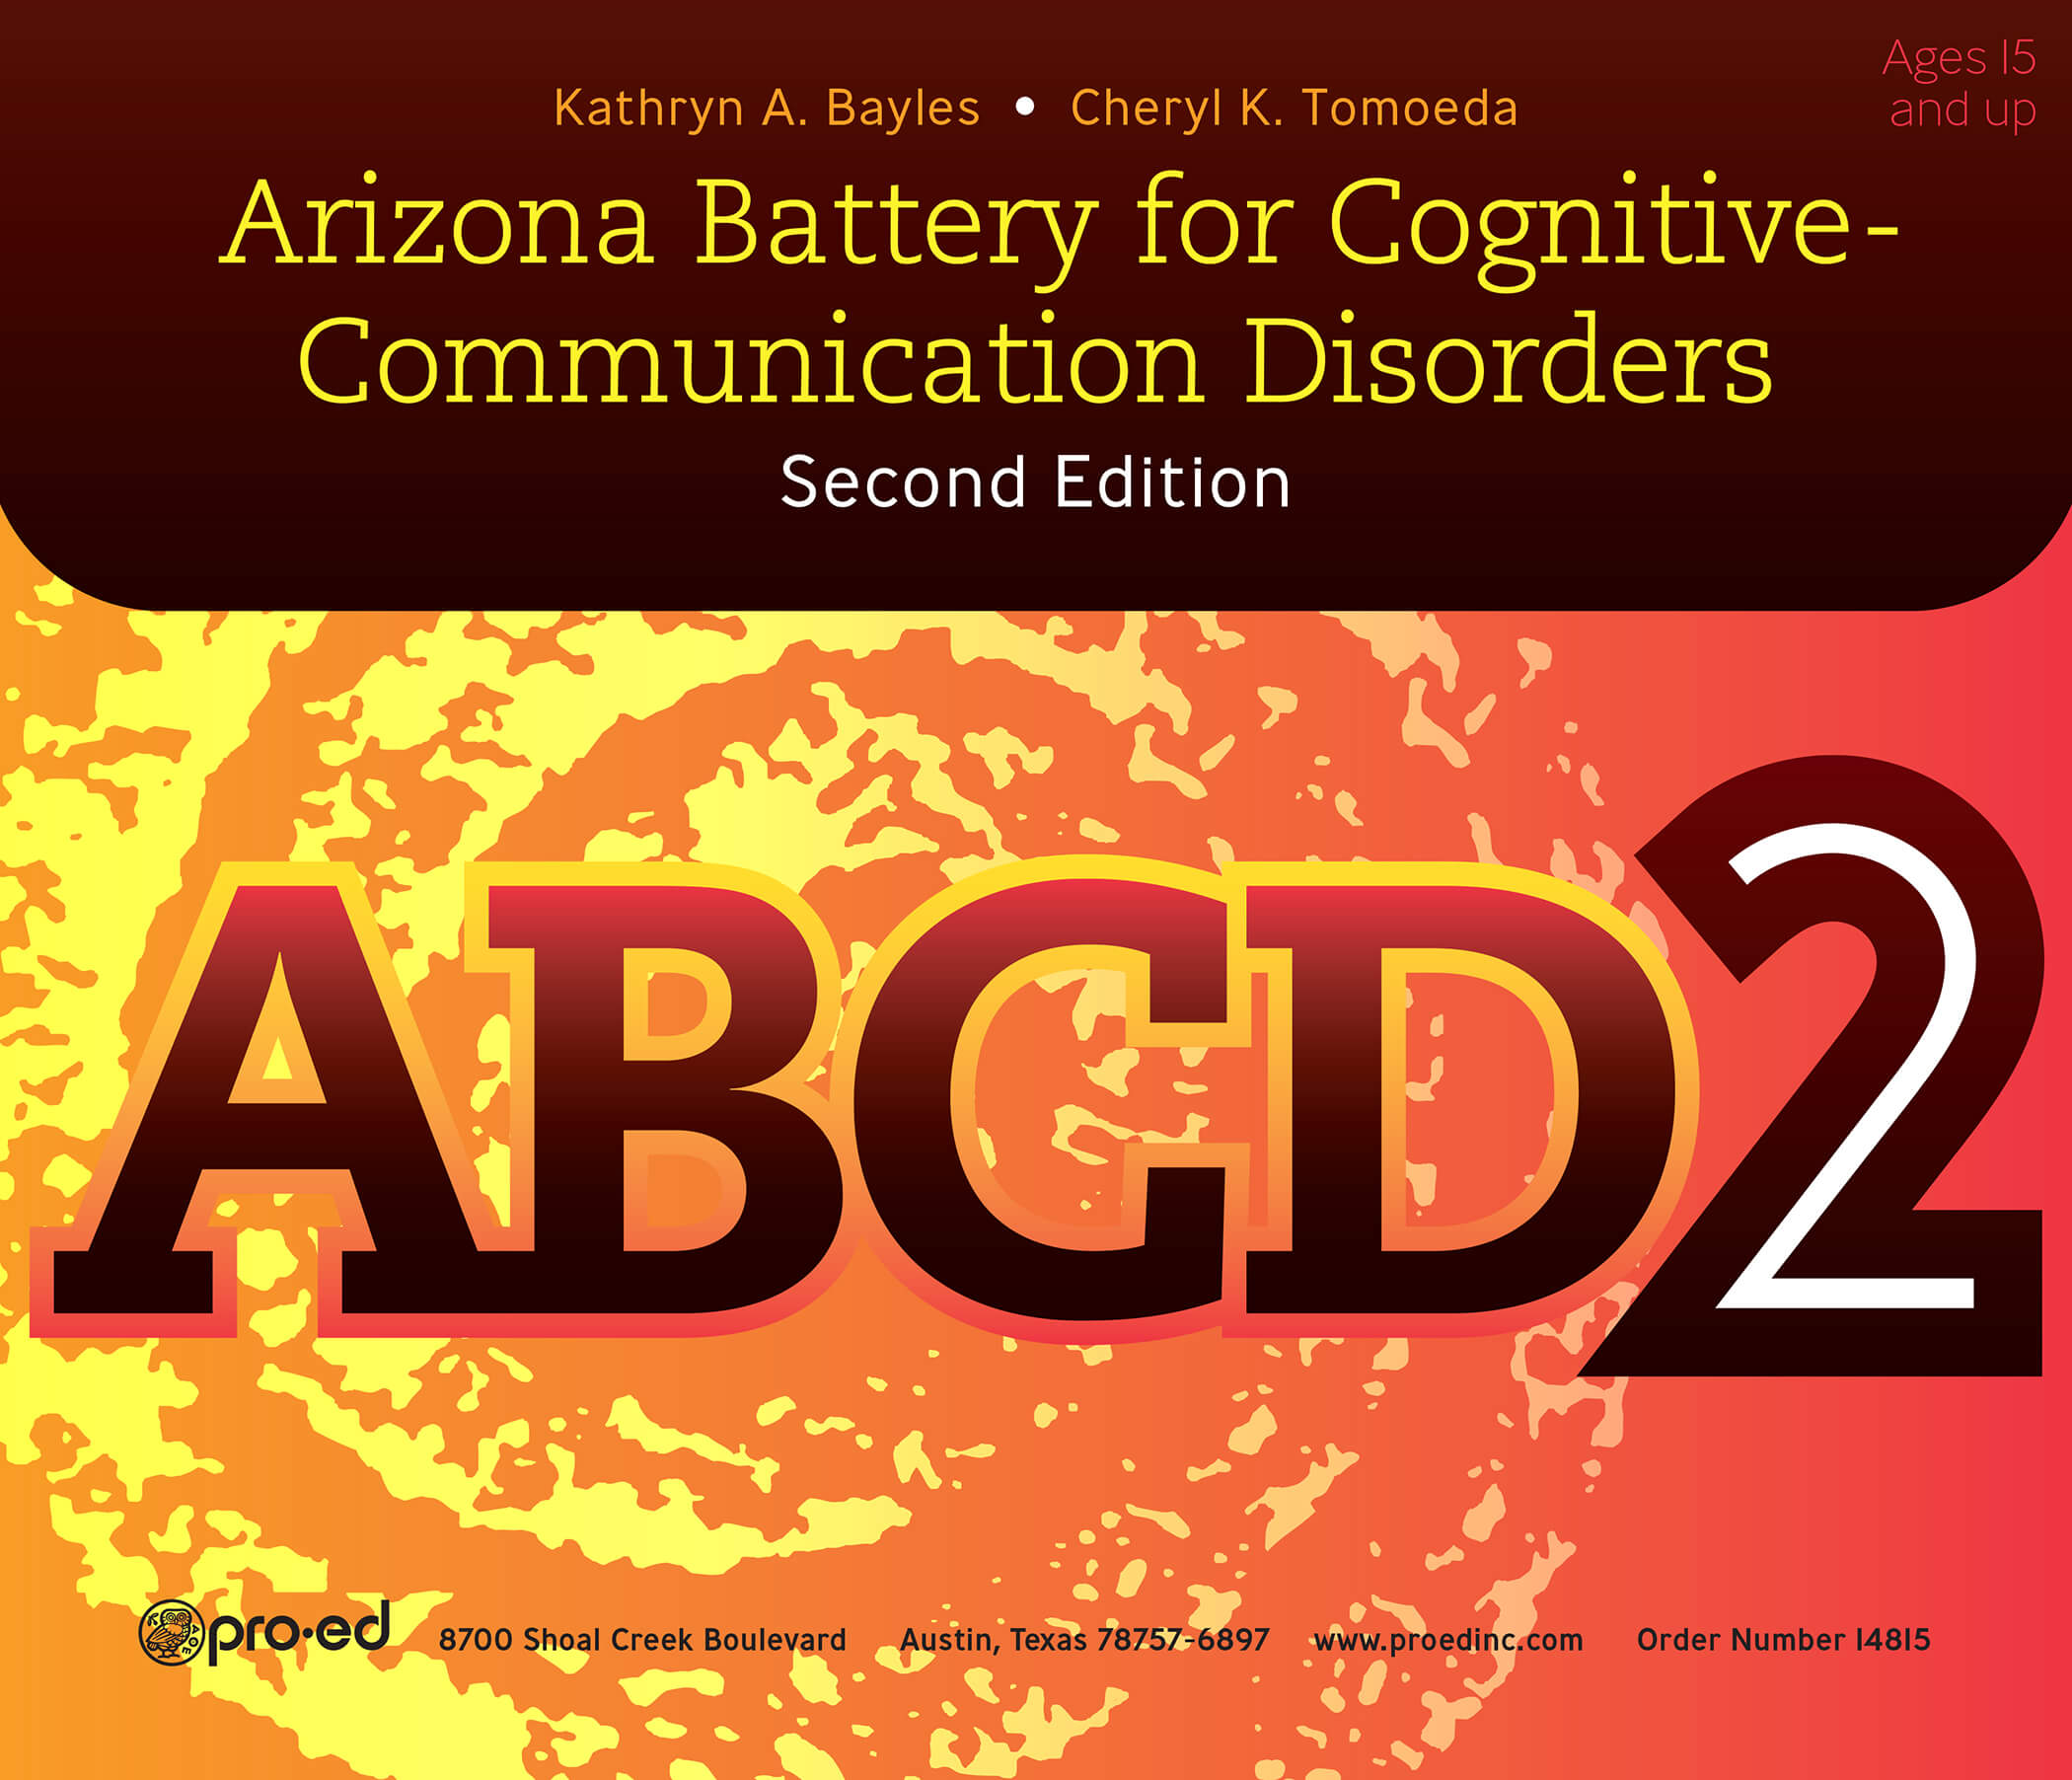 ABCD-2 Arizona Battery for Cognitive-Communication Disorders, 2nd Ed - 